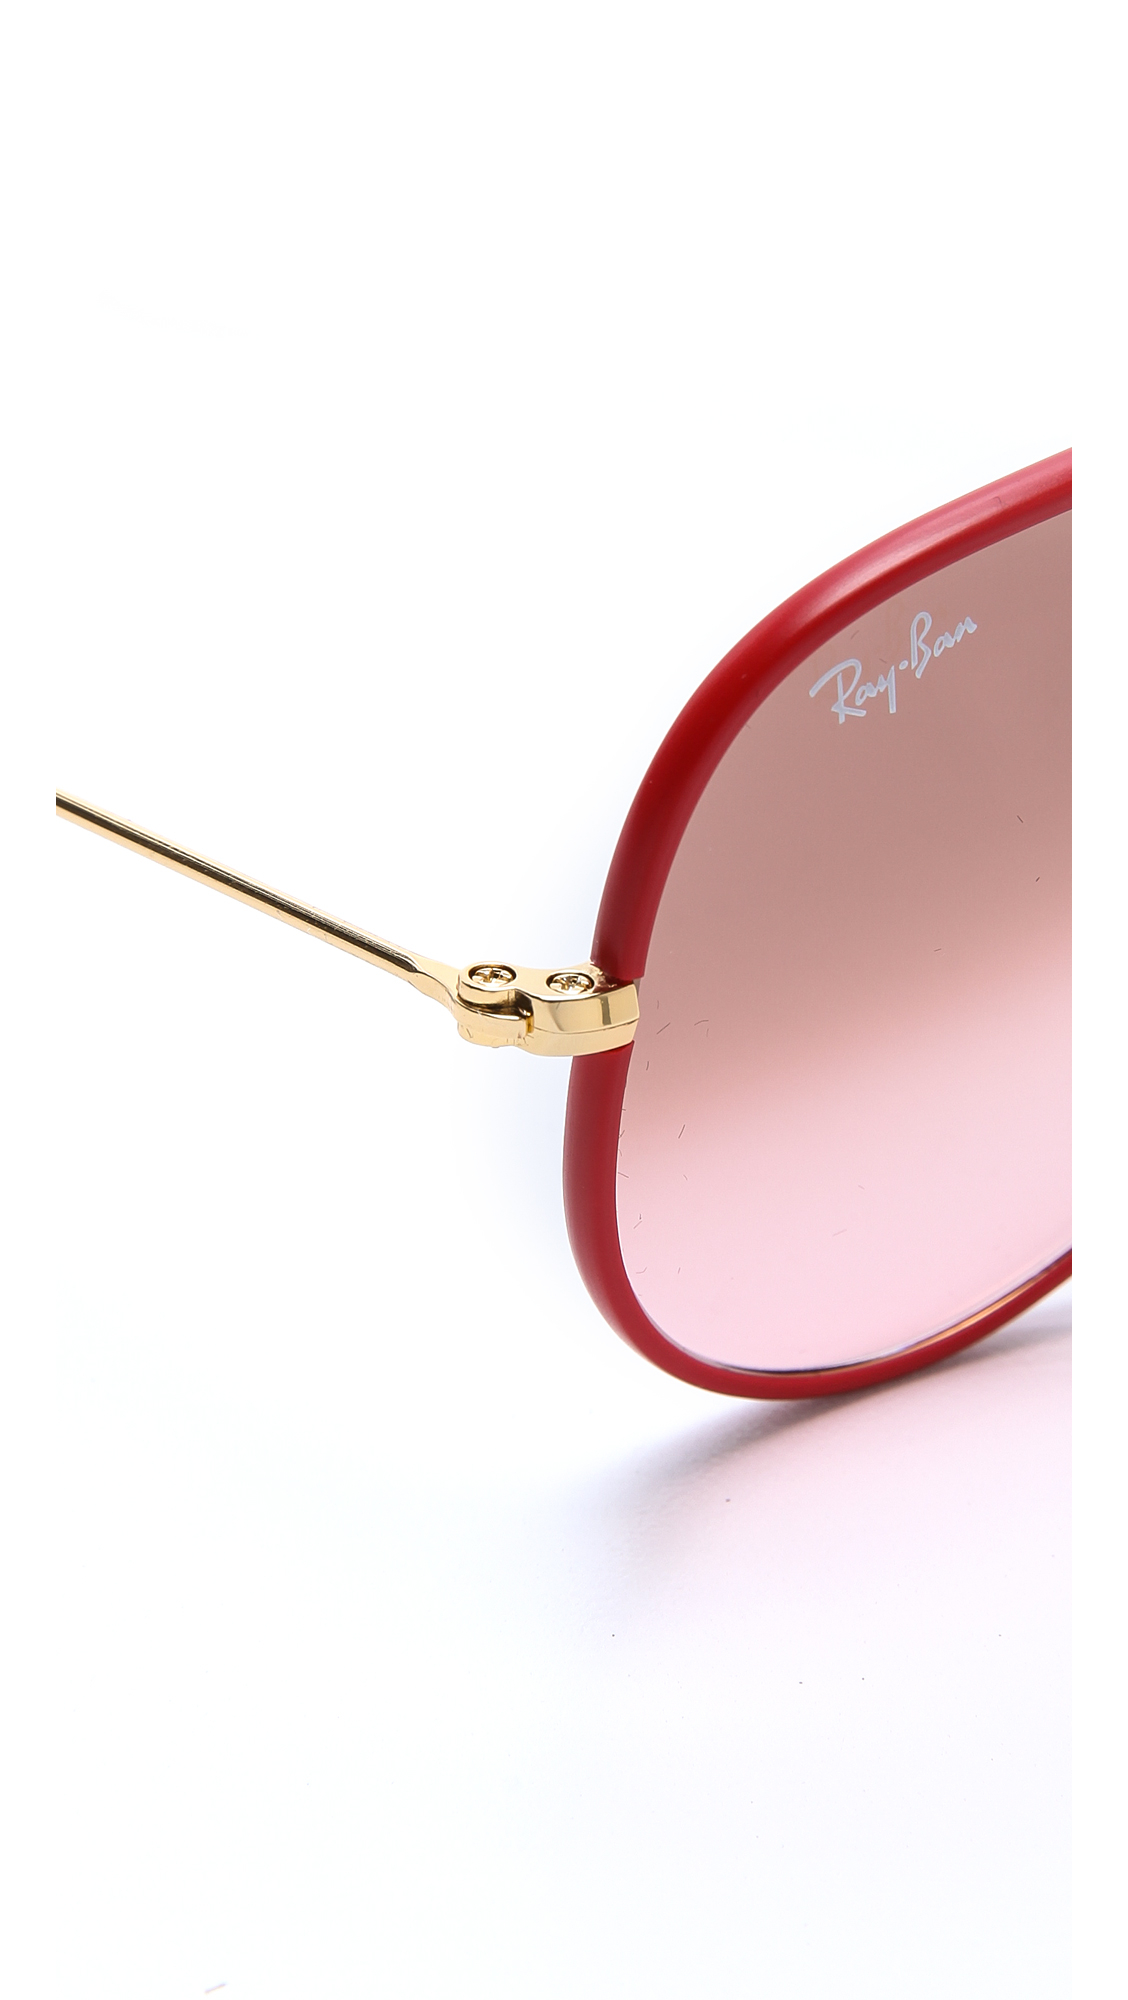 Lyst Ray Ban Acetate Covered Aviator Sunglasses Red In Red 